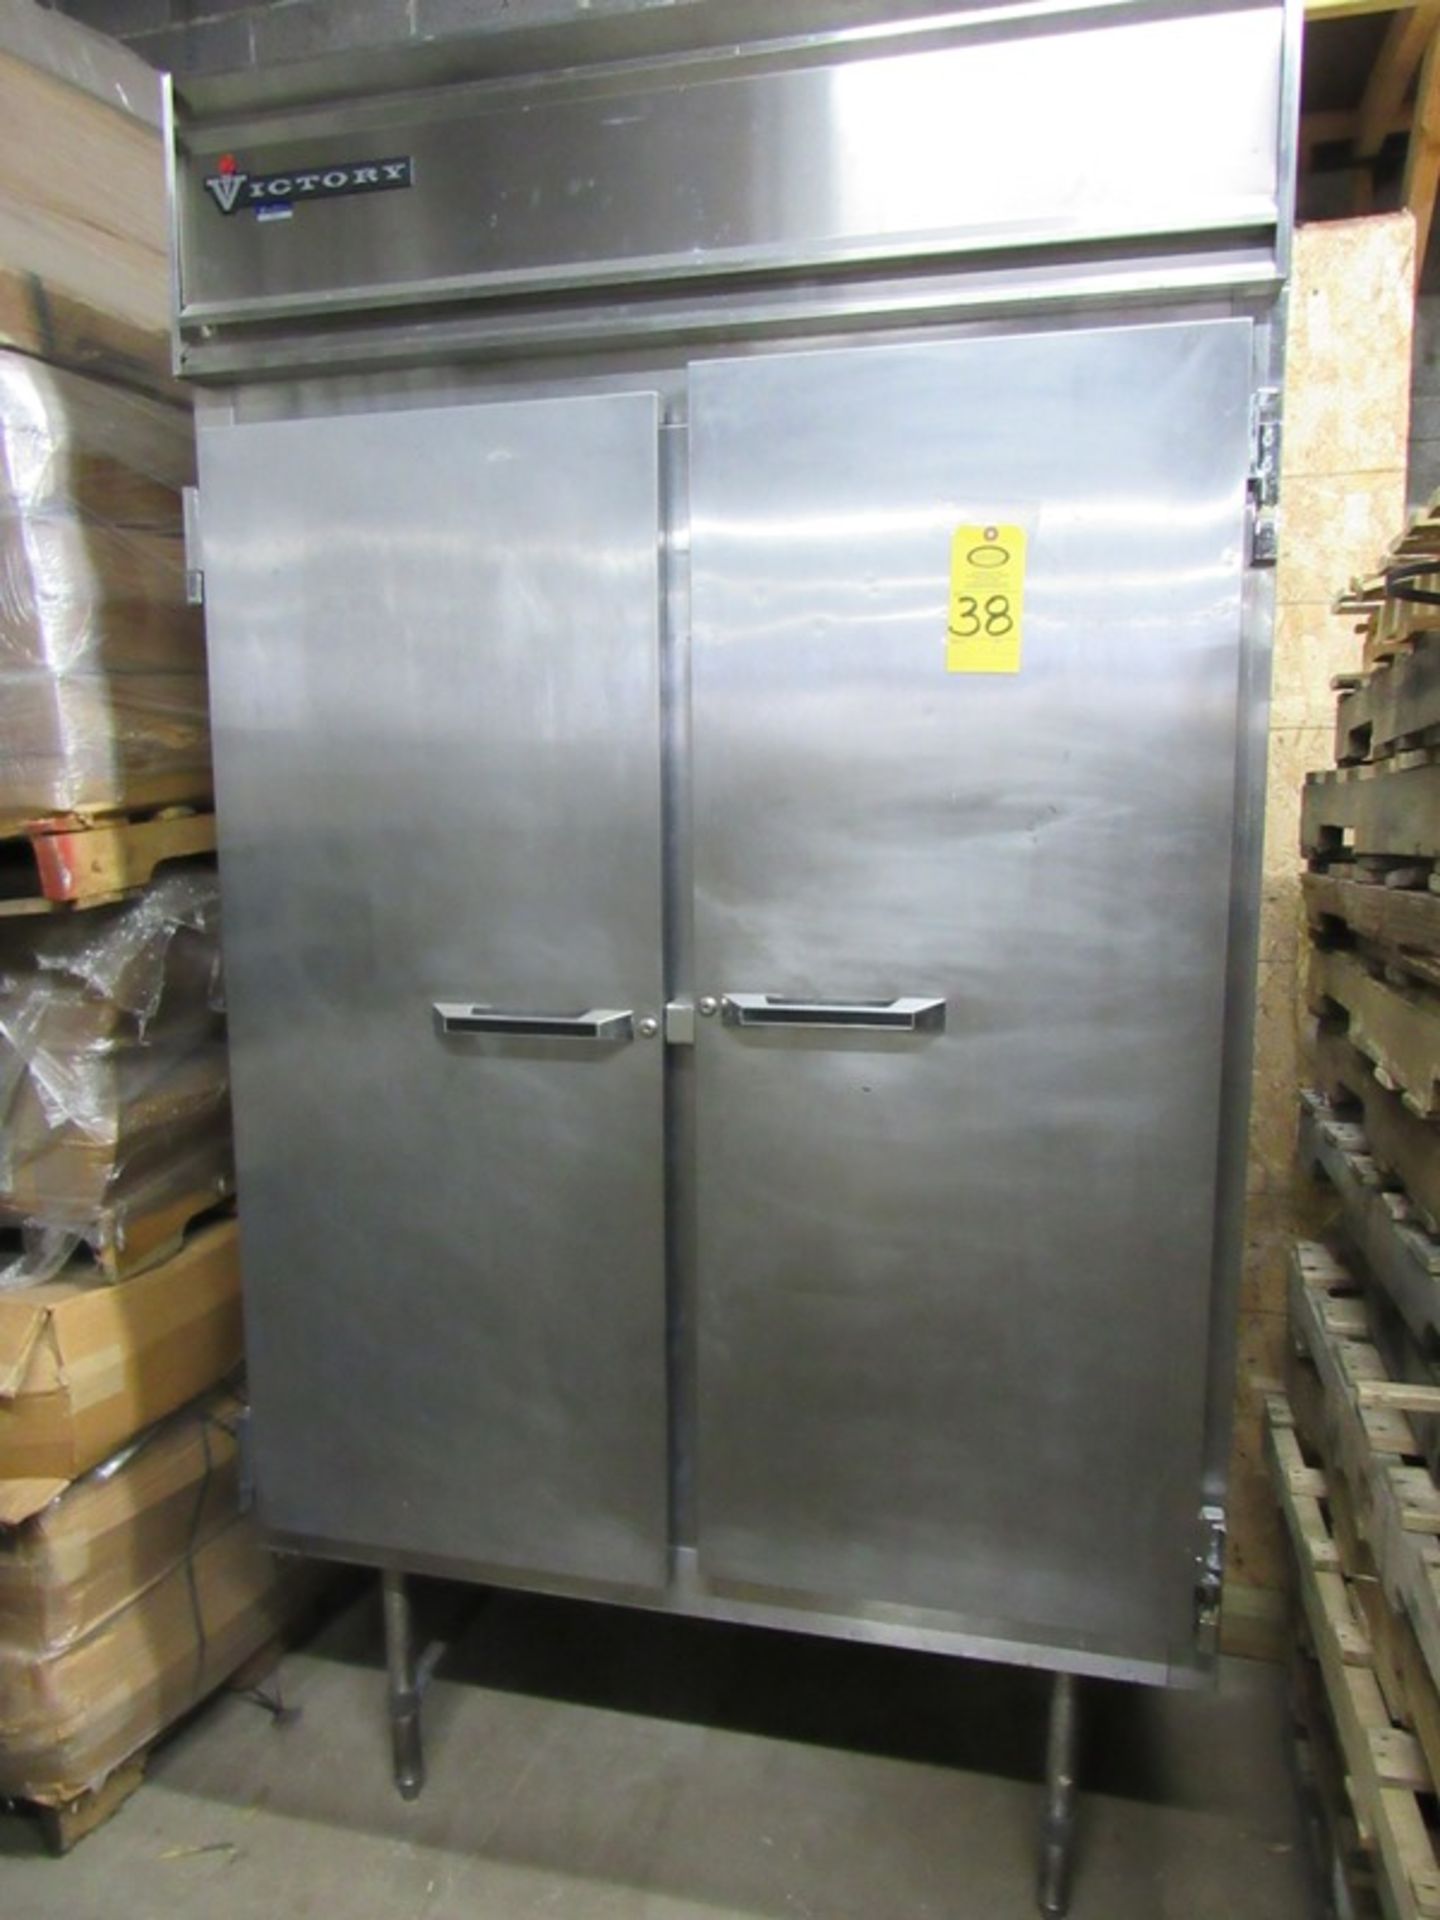 Victory Mdl. DRSA-2D-S7 Pass Through Display Refrigerator, (2) sliding glass front doors, 23 1/2"